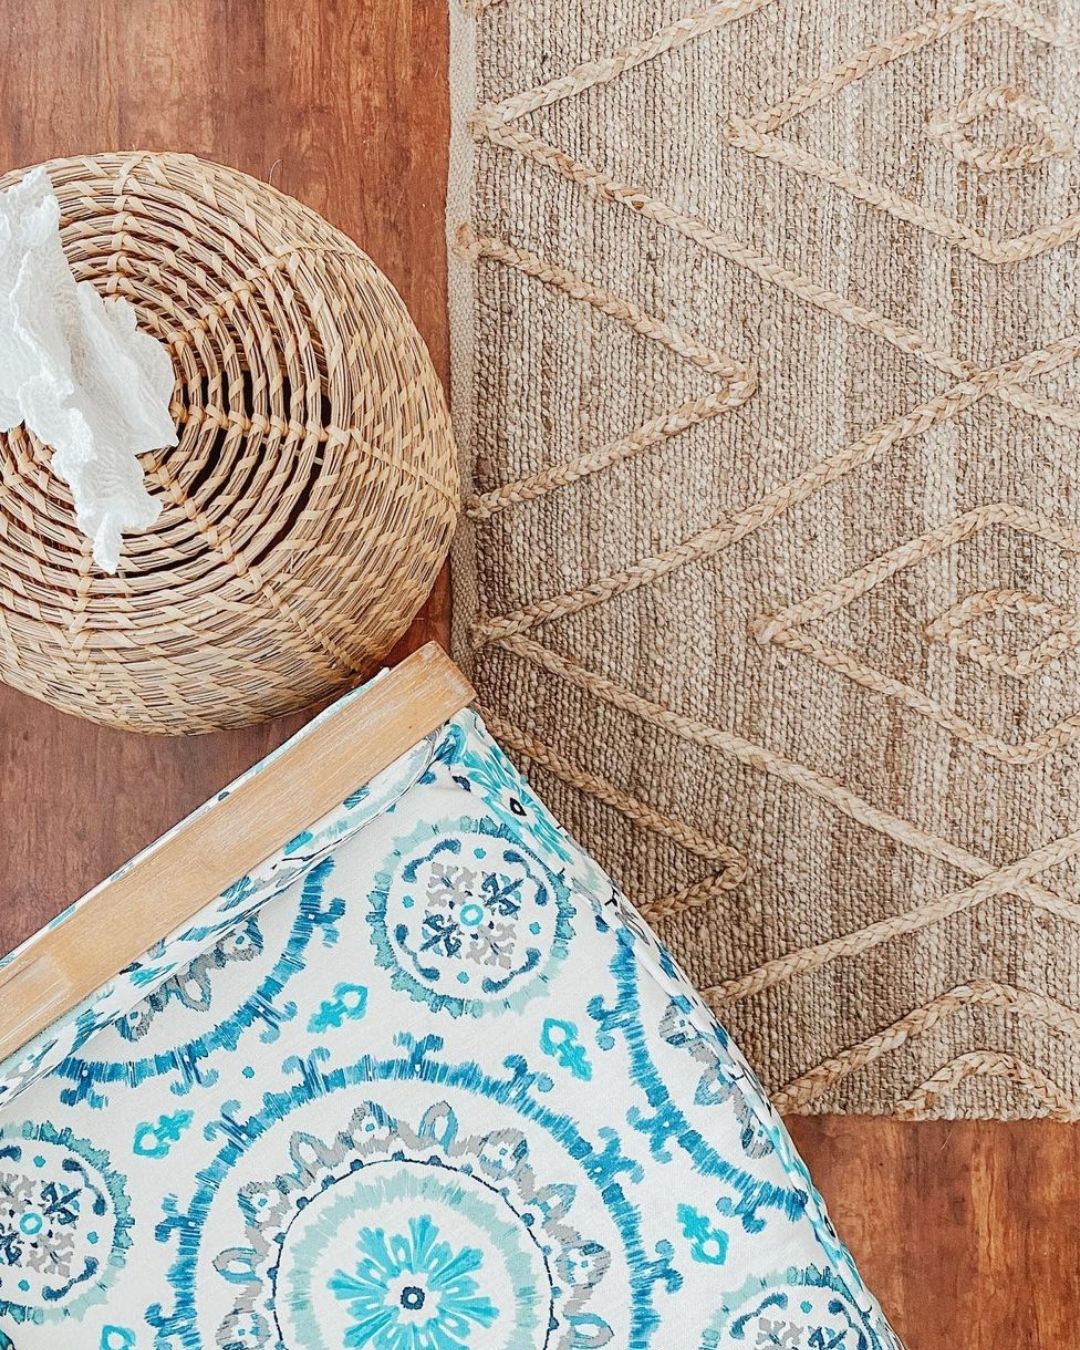 Top down photo of a patterned chair, textured jute rug and a wicker side table with a piece of white coral on top.